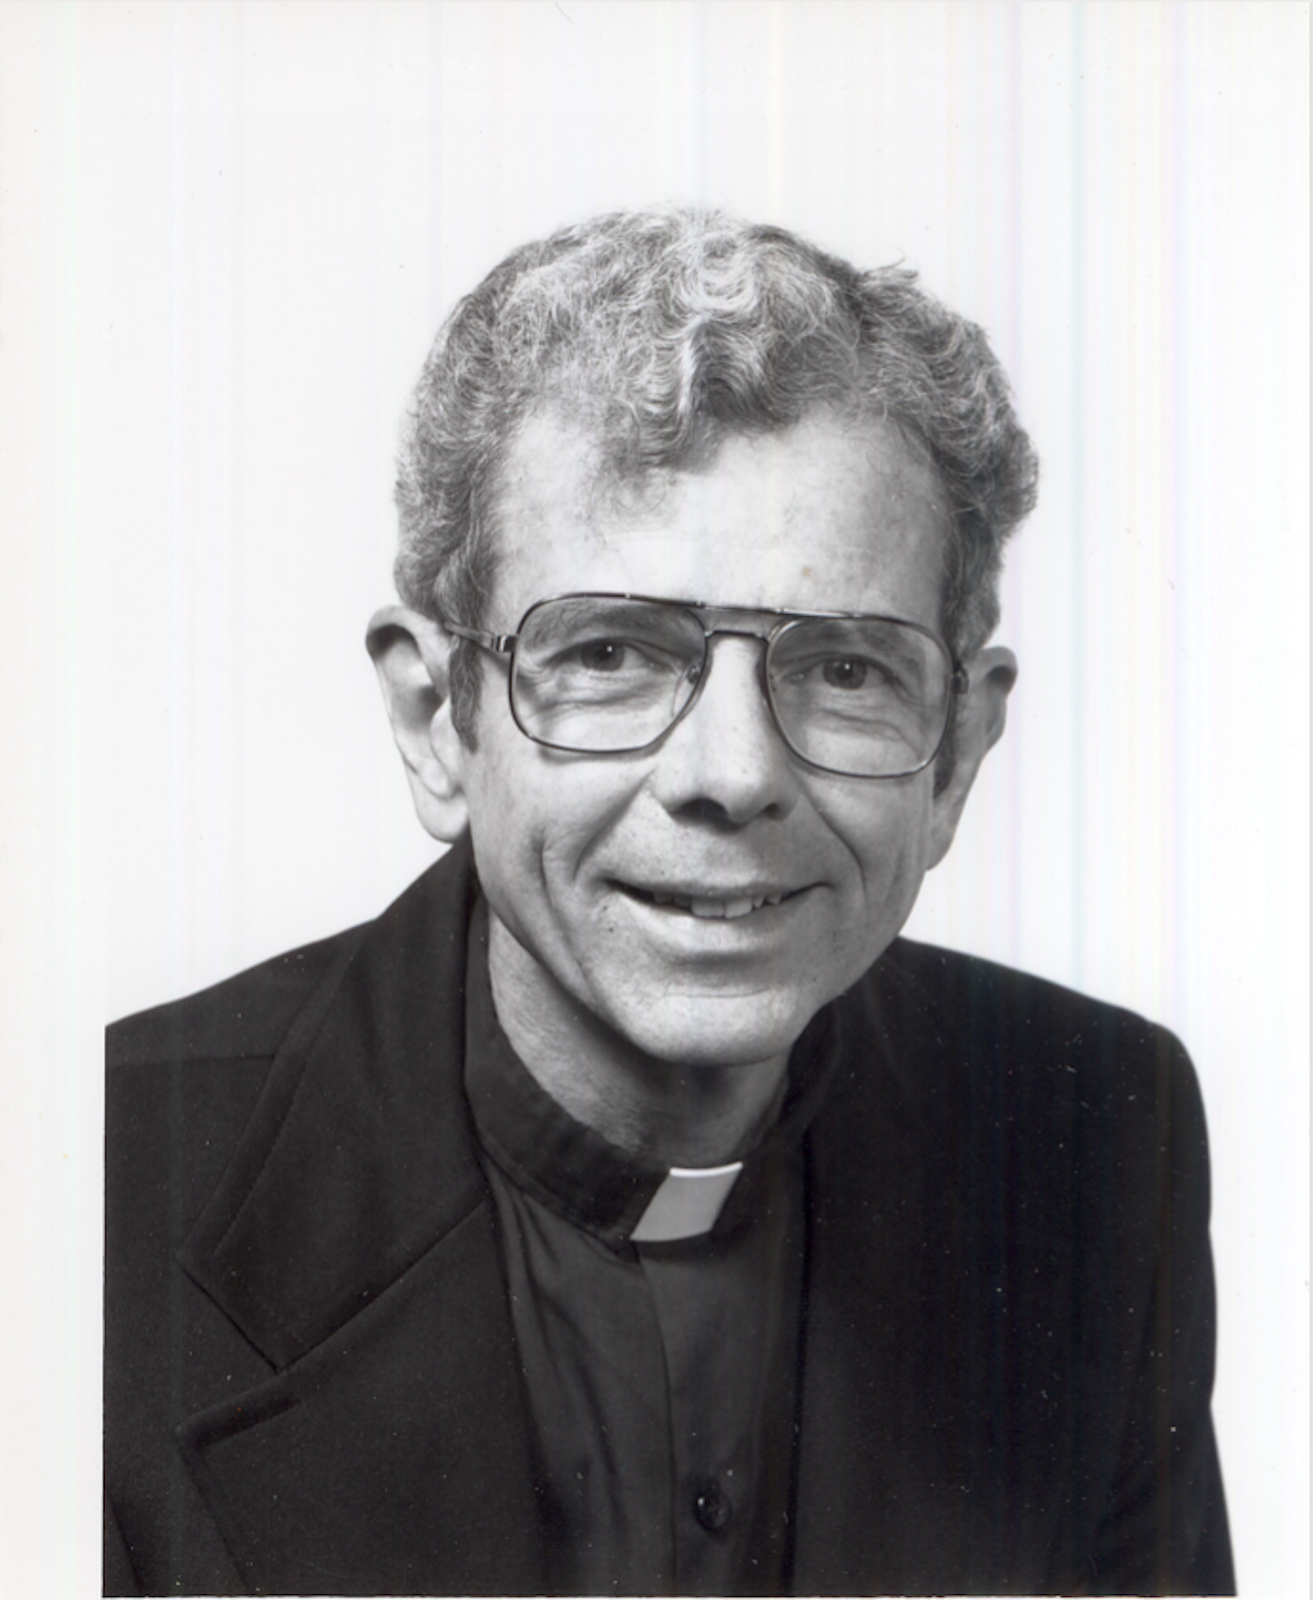 Fr. Cavanagh is pictured in an undated faculty photo. Growing up in a suburb of Cleveland, Fr. Cavanagh said his parents instilled values that encouraged him to think for himself.